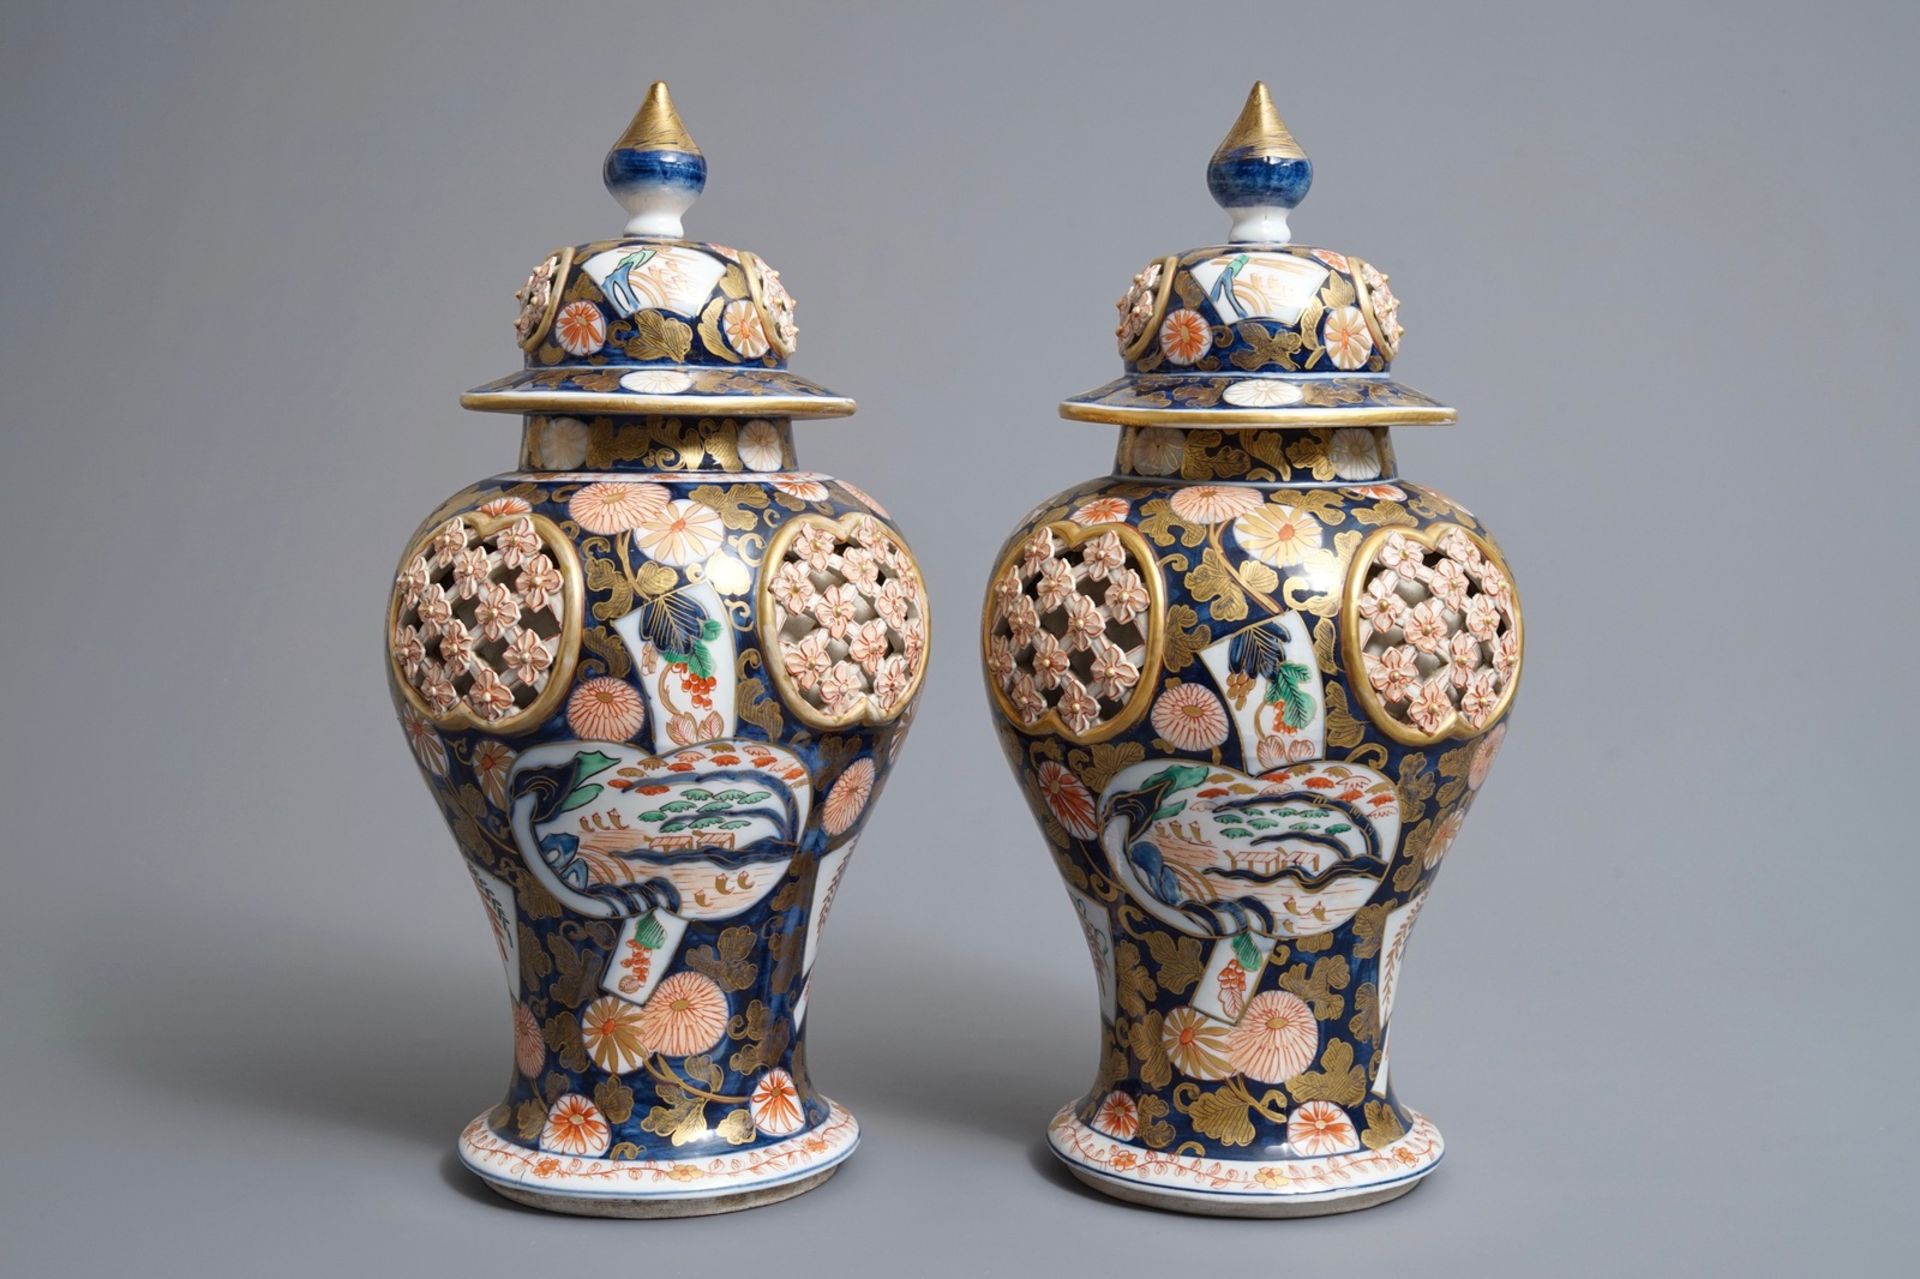 A pair of Imari-style double-walled reticulated vases and covers, Samson, Paris, 19th C.